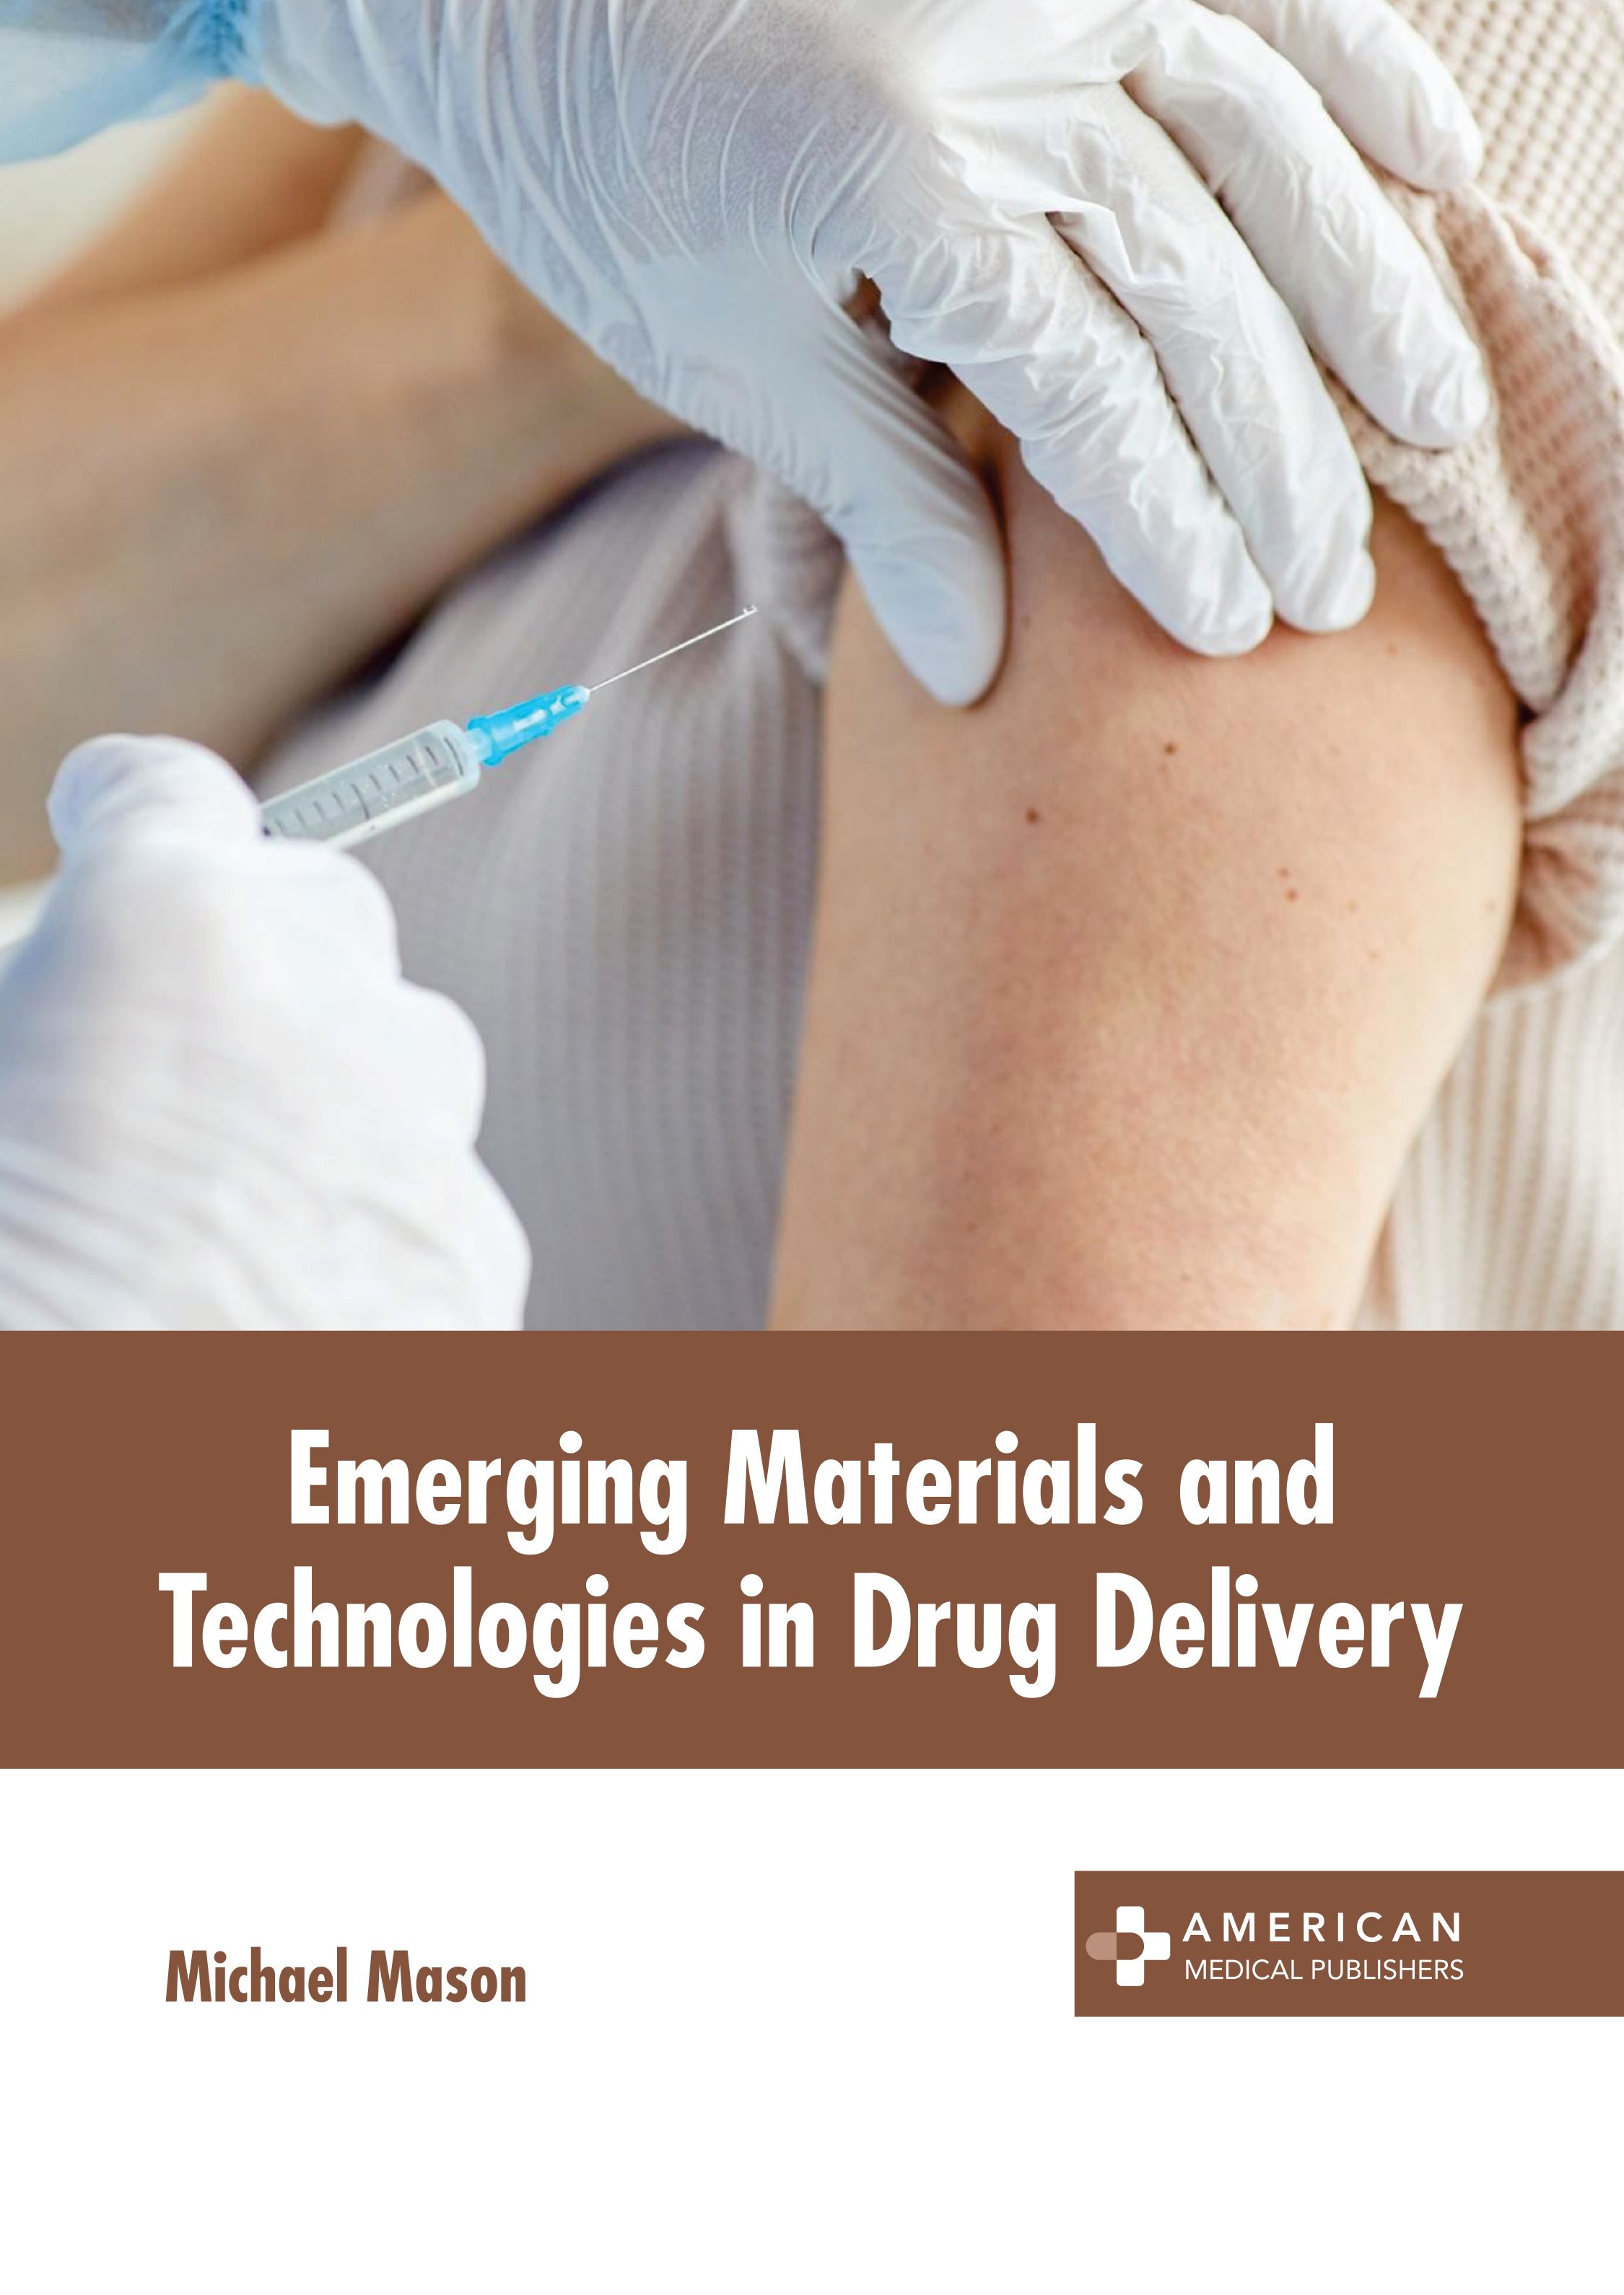 EMERGING MATERIALS AND TECHNOLOGIES IN DRUG DELIVERY